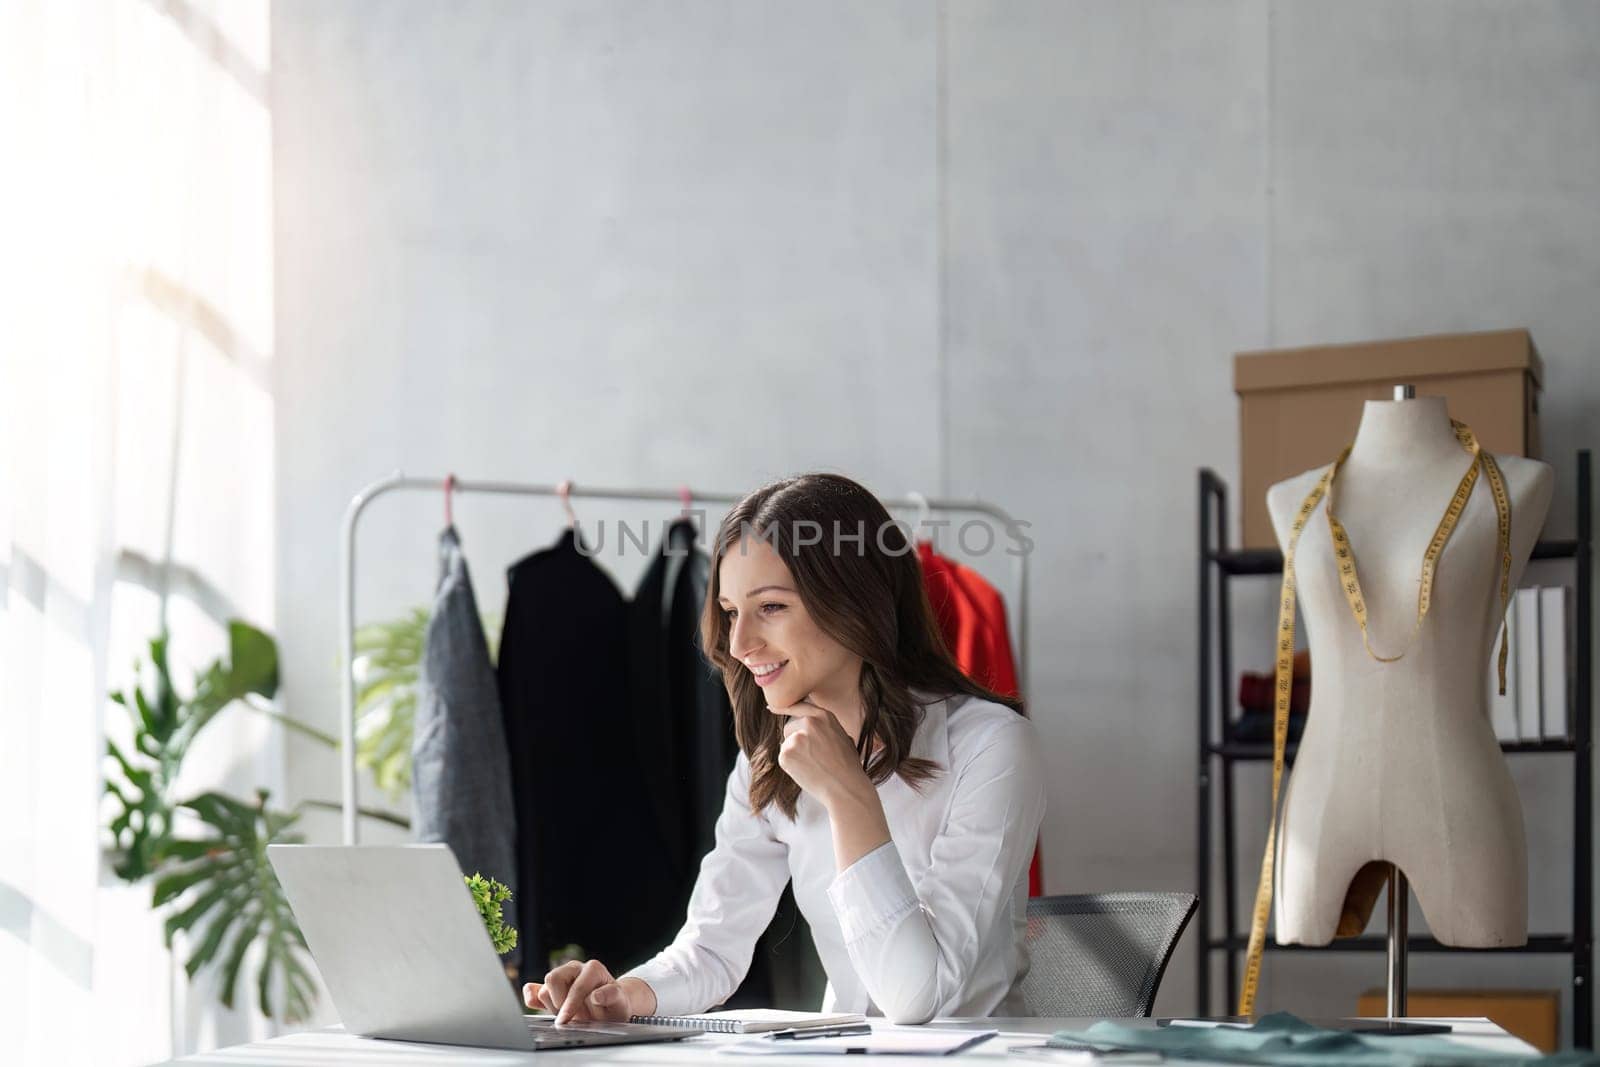 Responding on business e-mail. Beautiful young Fashion designer woman working using computer and smiling while siting in home.